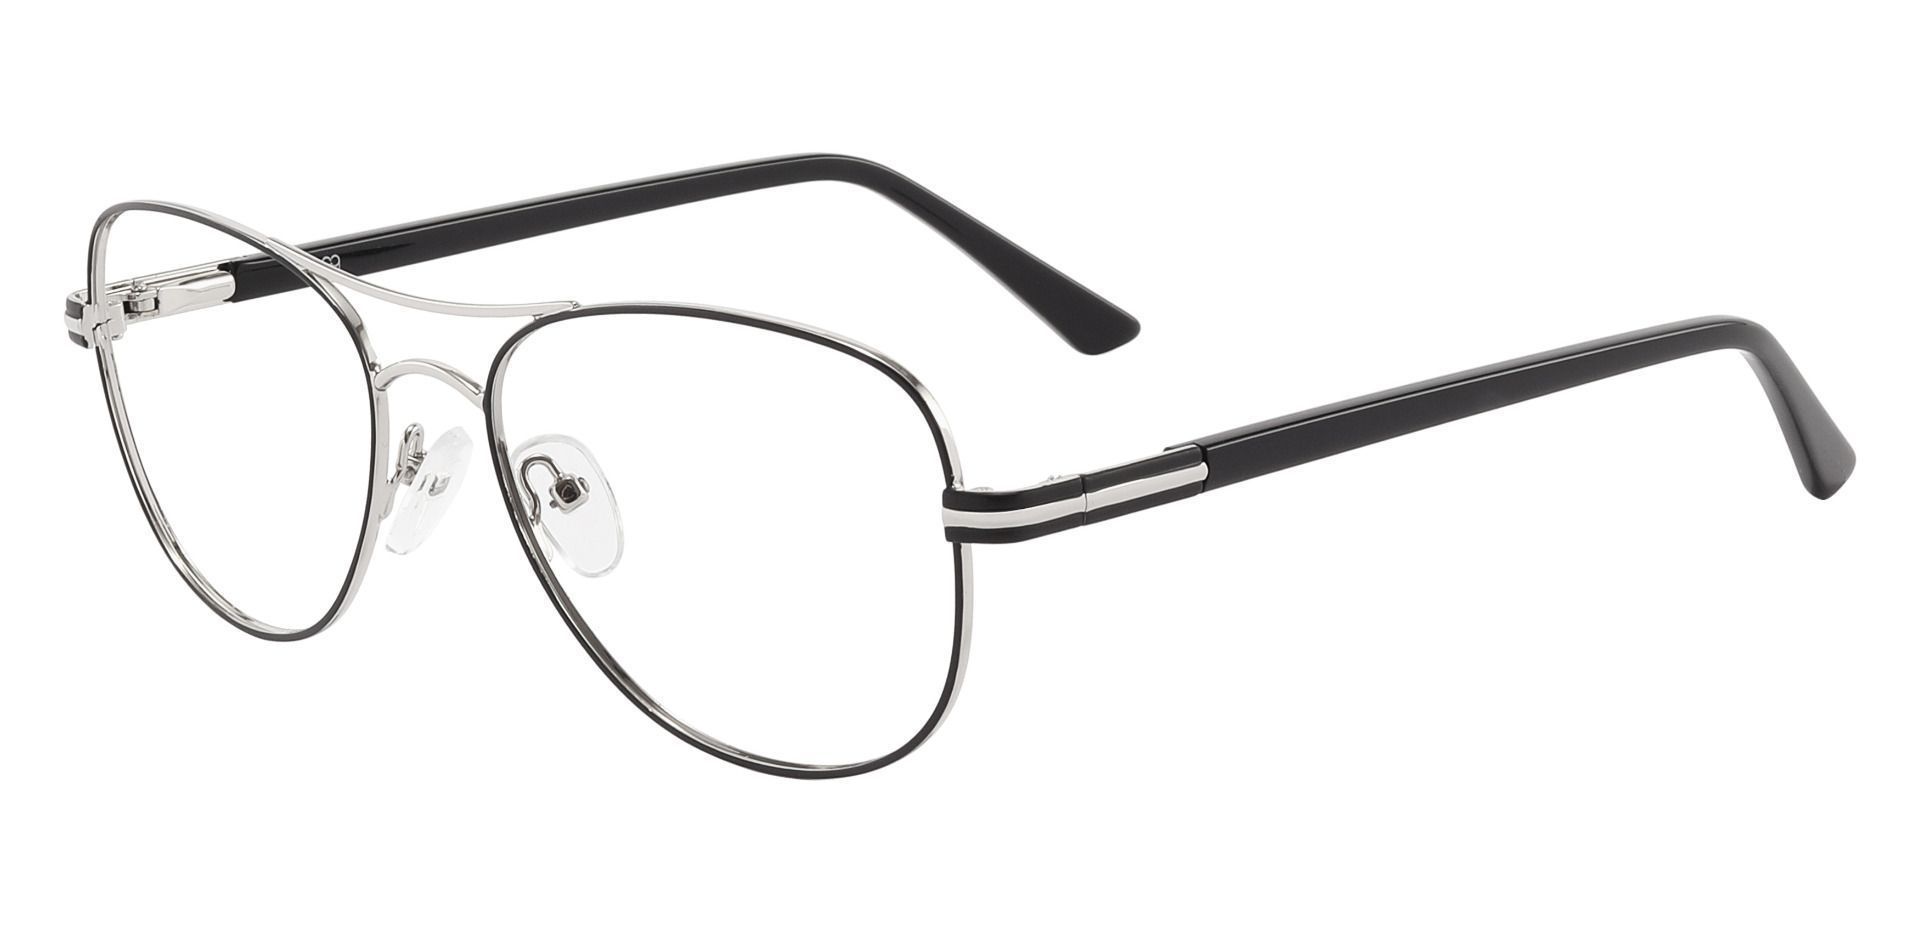 Reeves Aviator Lined Bifocal Glasses - Silver